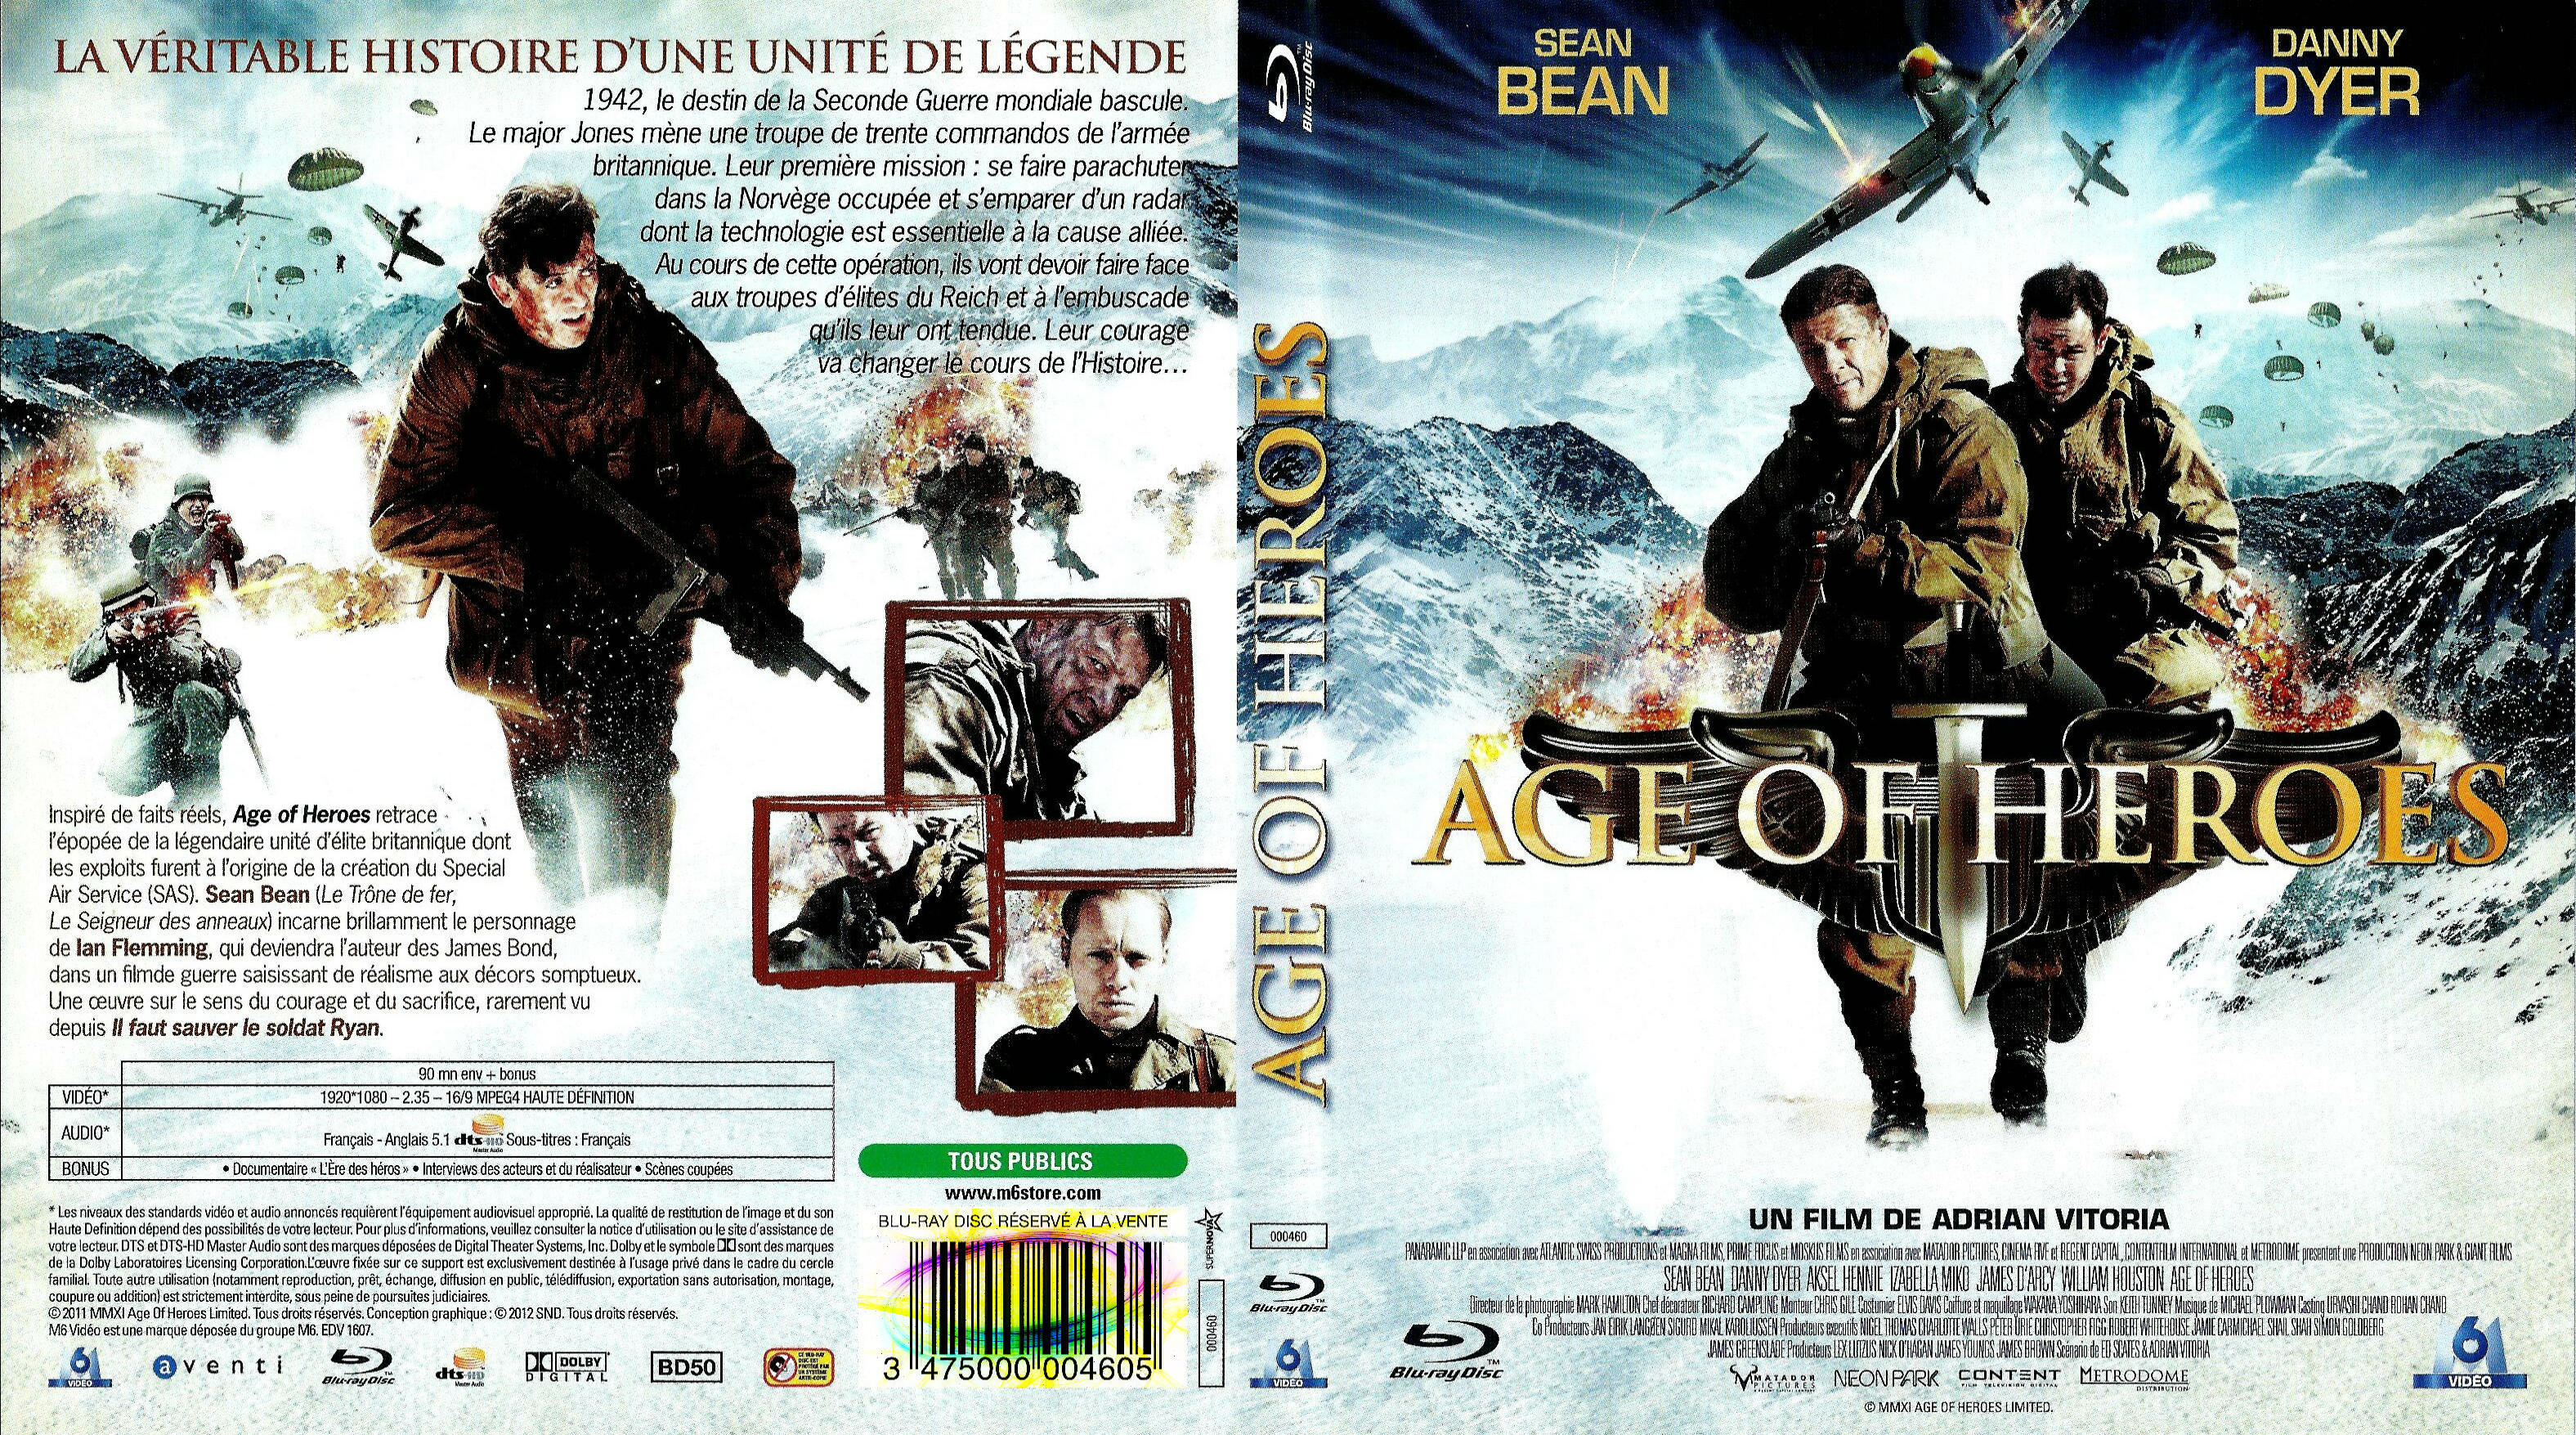 Jaquette DVD Age of heroes (BLU-RAY)